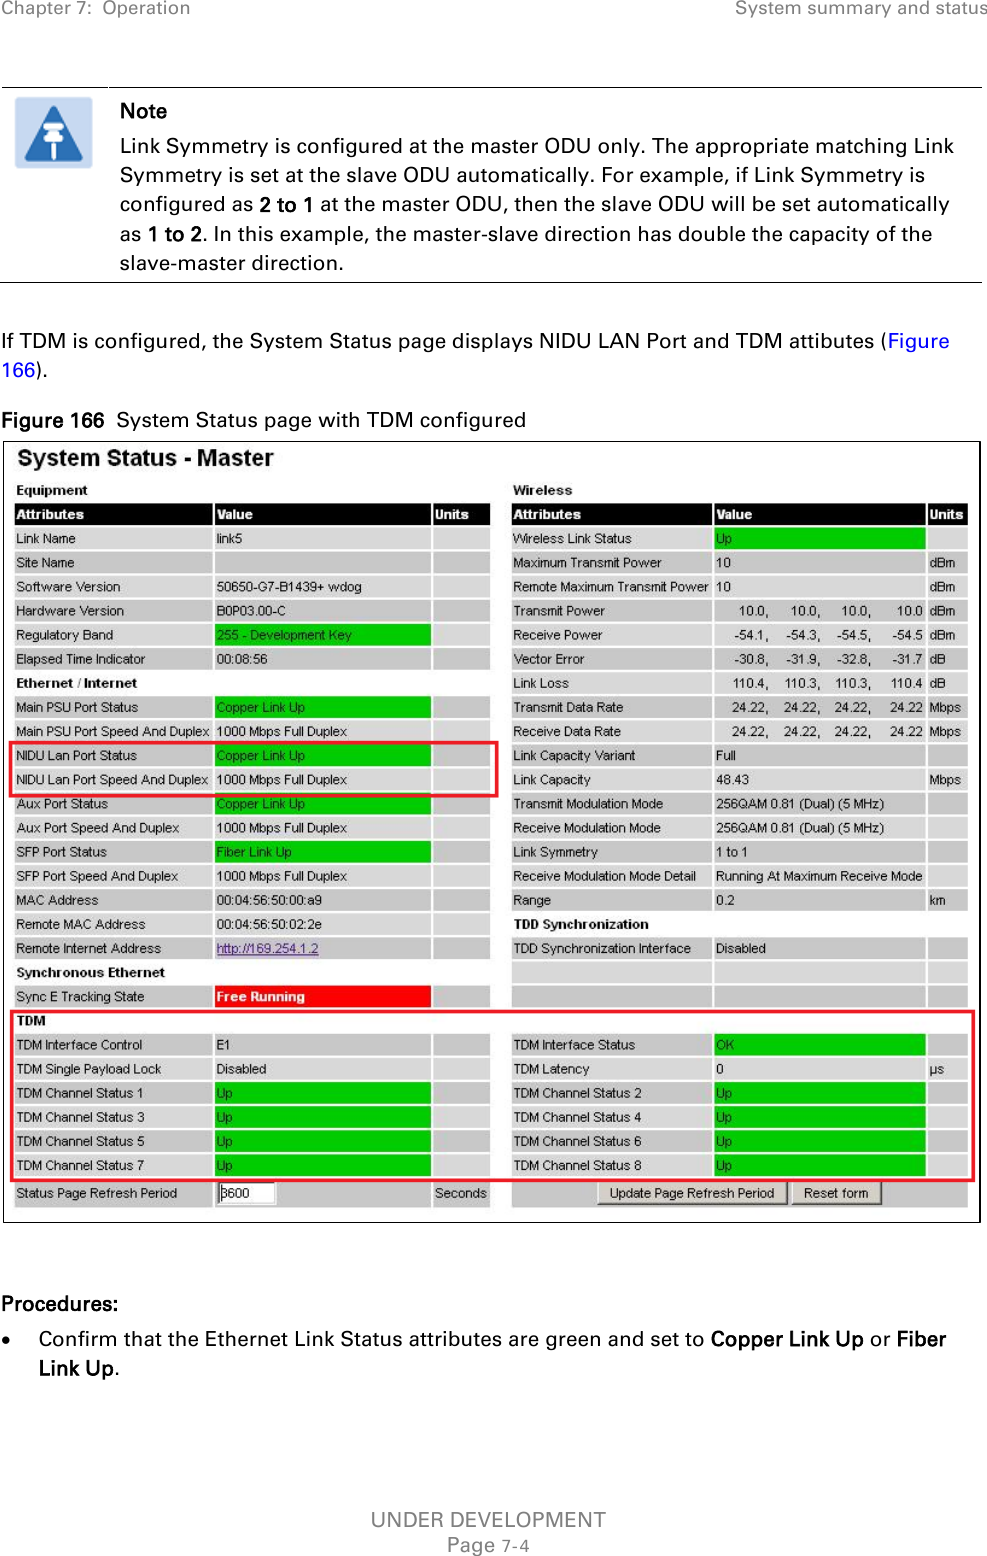 Chapter 7:  Operation System summary and status   Note Link Symmetry is configured at the master ODU only. The appropriate matching Link Symmetry is set at the slave ODU automatically. For example, if Link Symmetry is configured as 2 to 1 at the master ODU, then the slave ODU will be set automatically as 1 to 2. In this example, the master-slave direction has double the capacity of the slave-master direction.  If TDM is configured, the System Status page displays NIDU LAN Port and TDM attibutes (Figure 166). Figure 166  System Status page with TDM configured   Procedures: • Confirm that the Ethernet Link Status attributes are green and set to Copper Link Up or Fiber Link Up.  UNDER DEVELOPMENT Page 7-4 